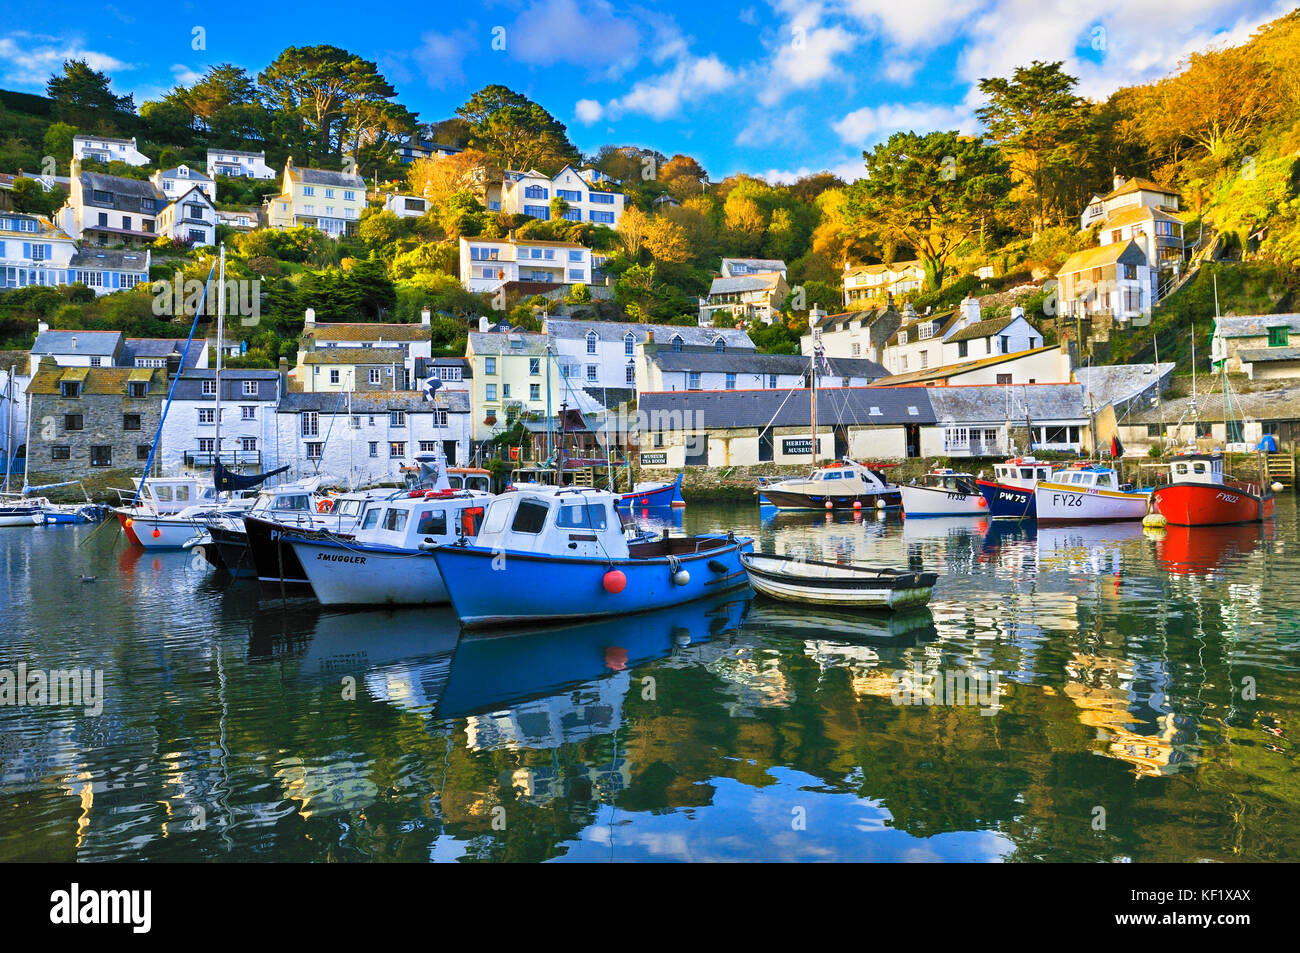 Polperro, Cornwall, UK.  Picturesque scene showing the inner harbour with its colourful fishing boats and traditional stone cottages. Stock Photo